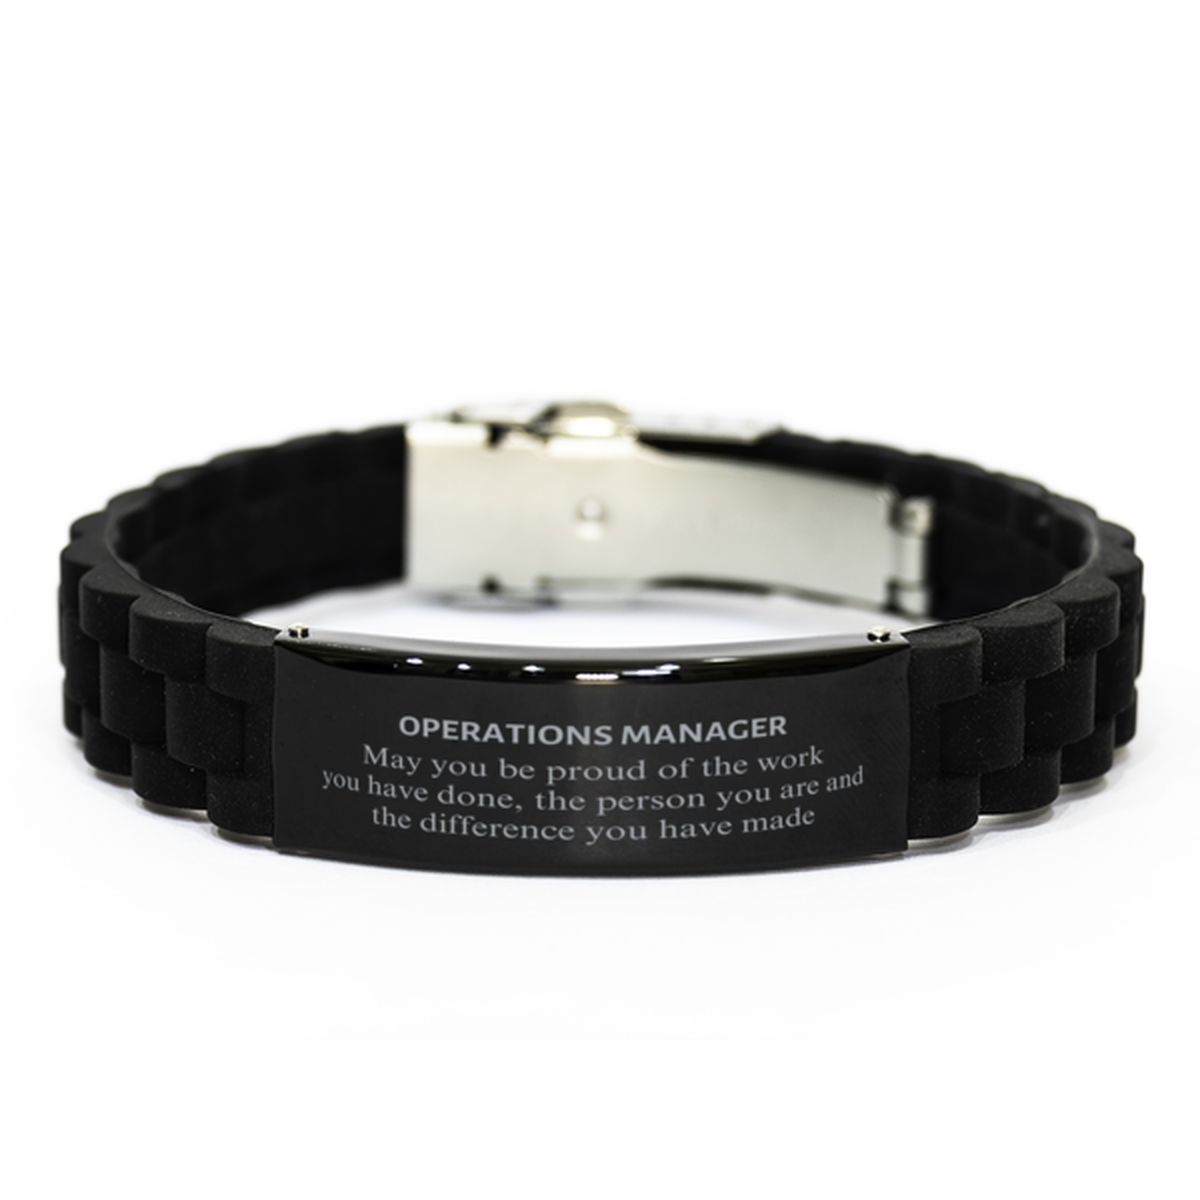 Operations Manager May you be proud of the work you have done, Retirement Operations Manager Black Glidelock Clasp Bracelet for Colleague Appreciation Gifts Amazing for Operations Manager